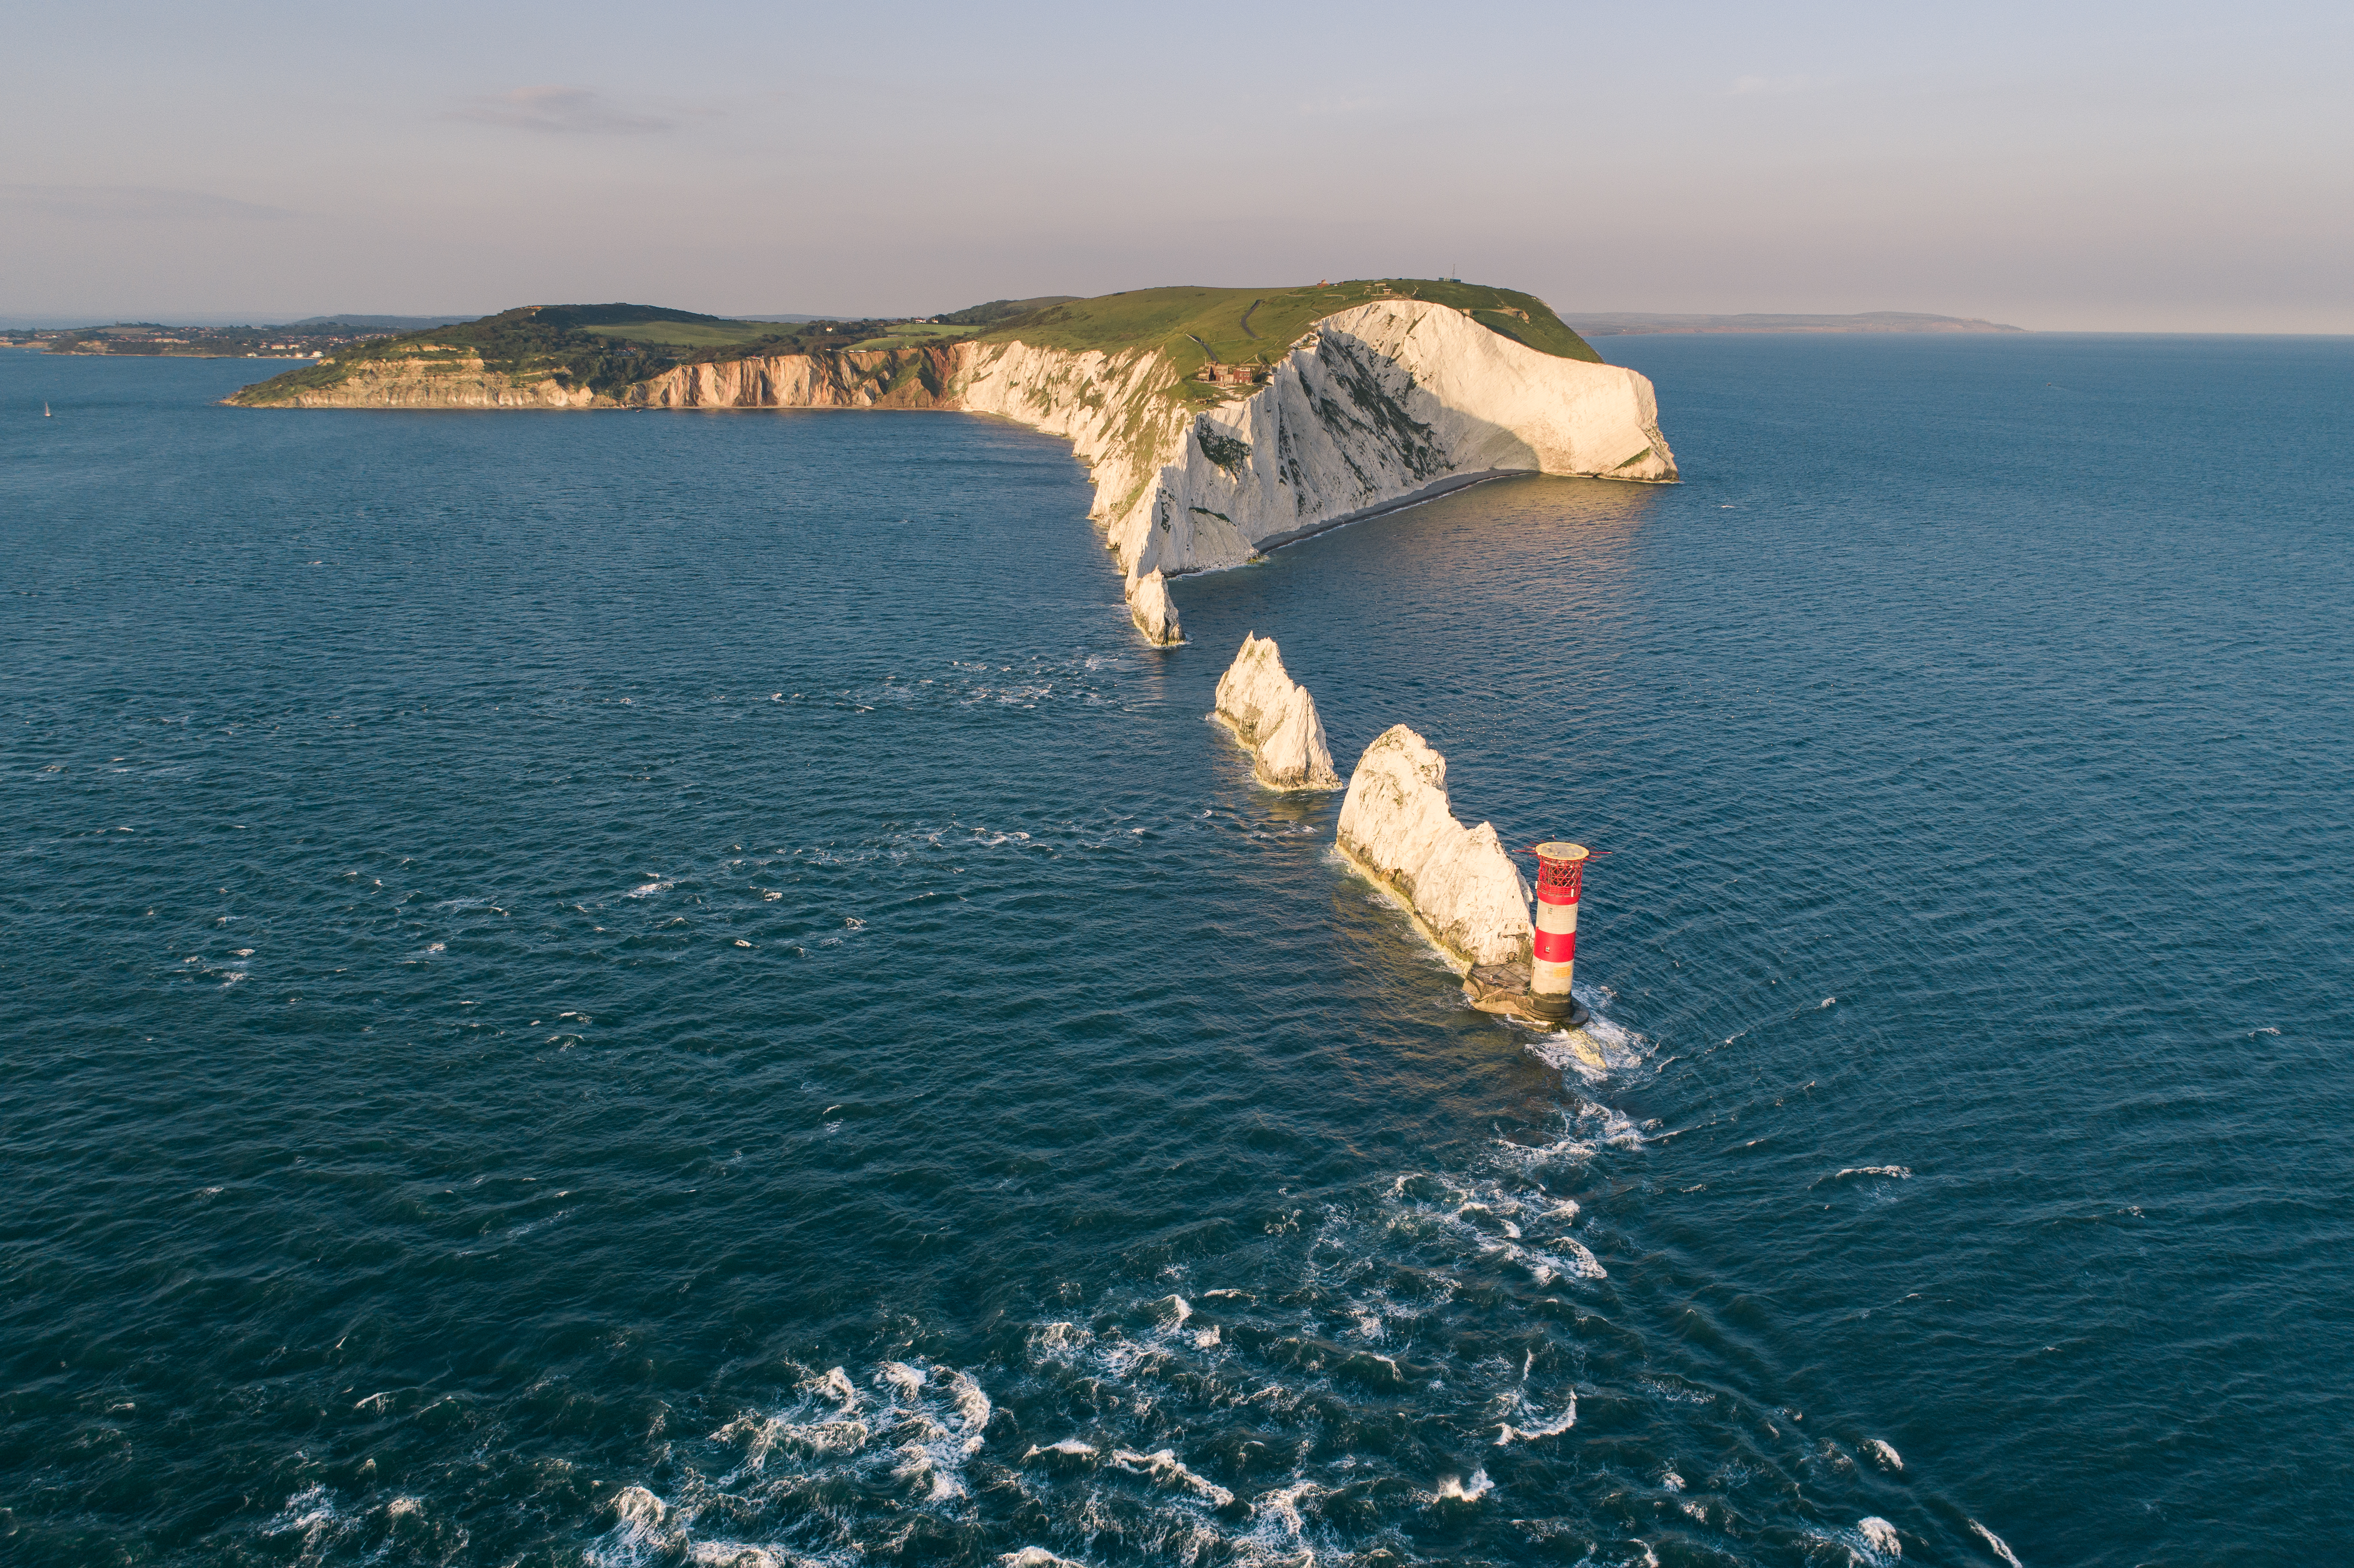 Isle of Wight for an accessible summer holiday in the UK